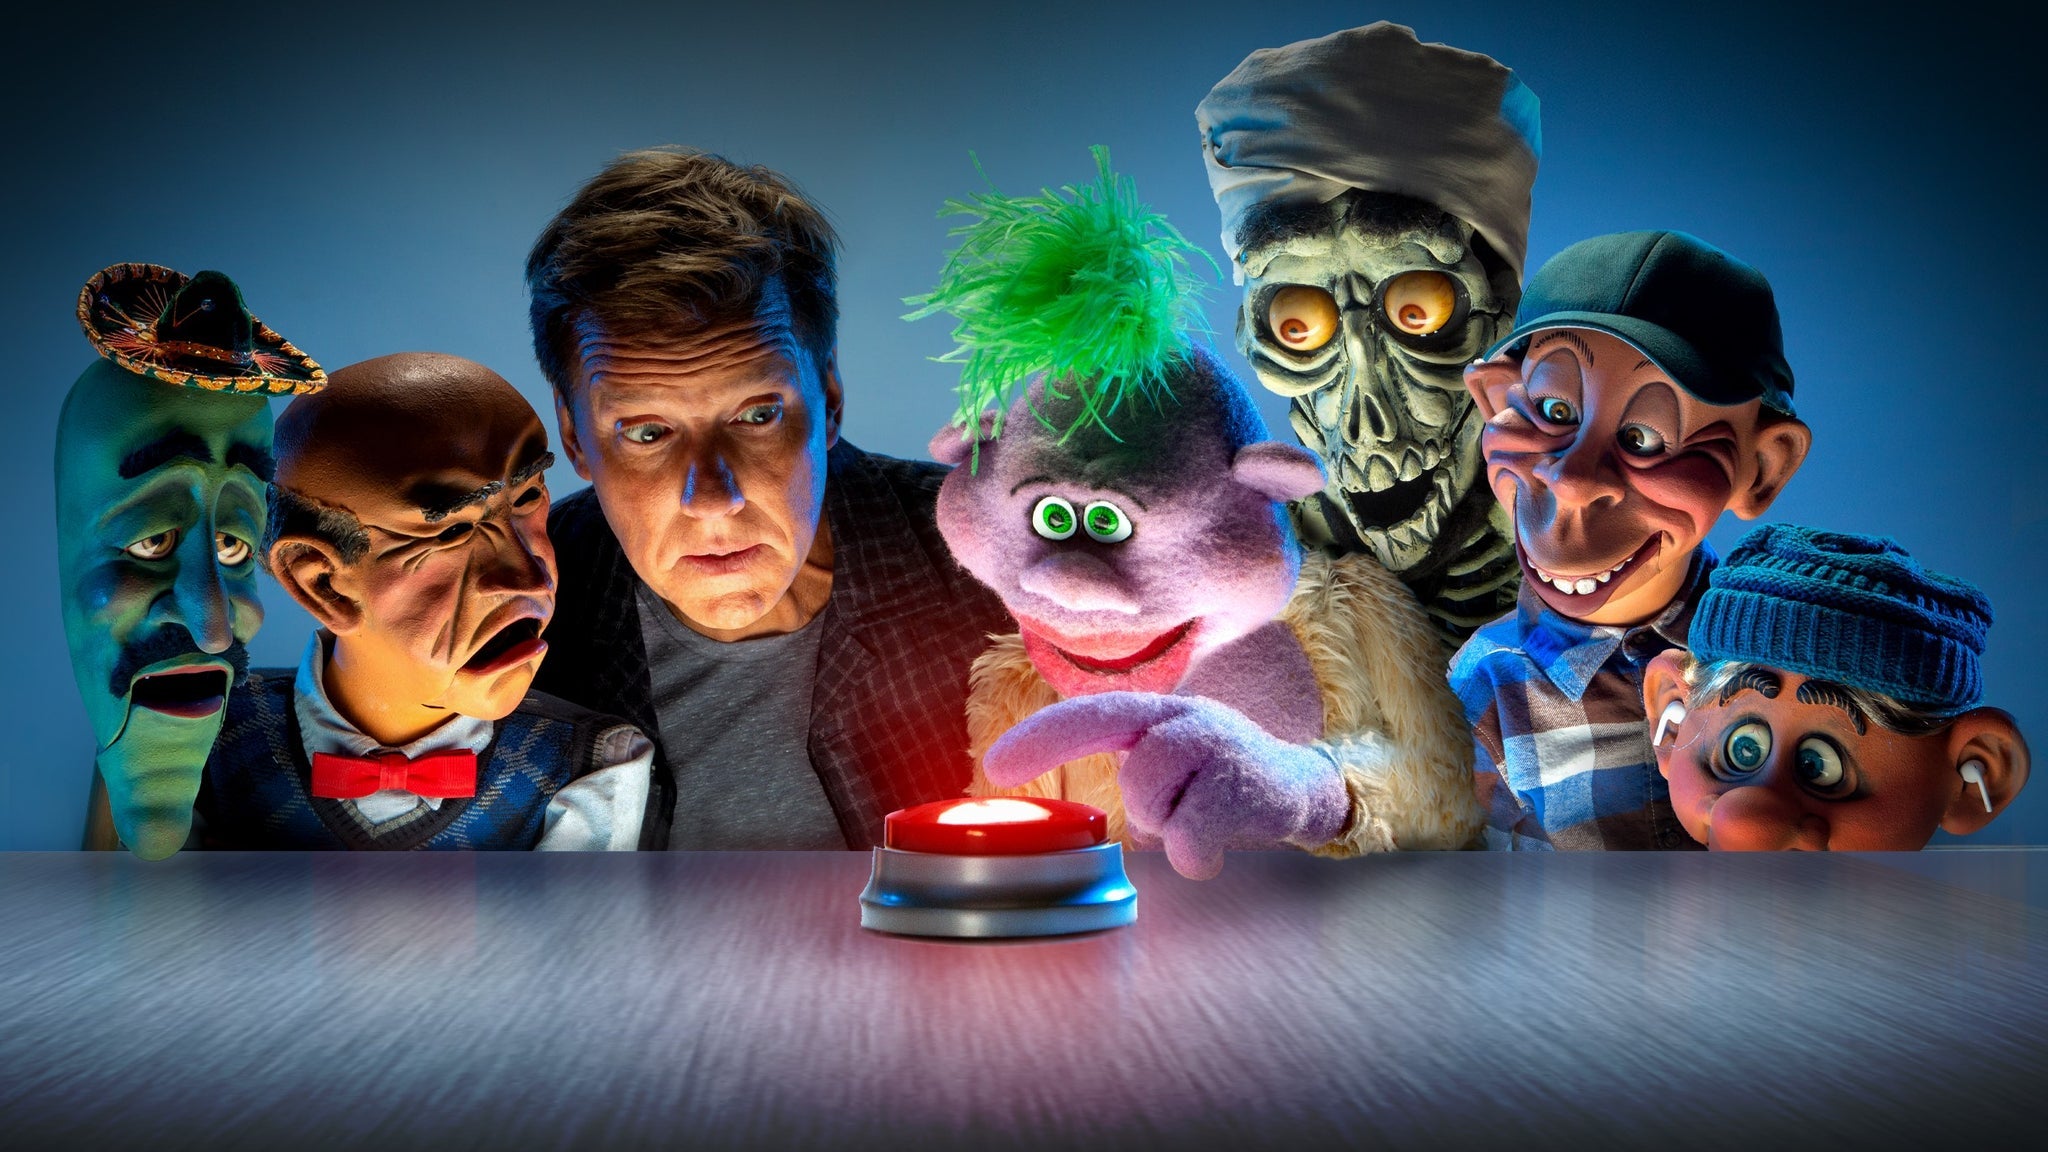 Jeff Dunham: Still Not Canceled in Dallas promo photo for Official Platinum presale offer code